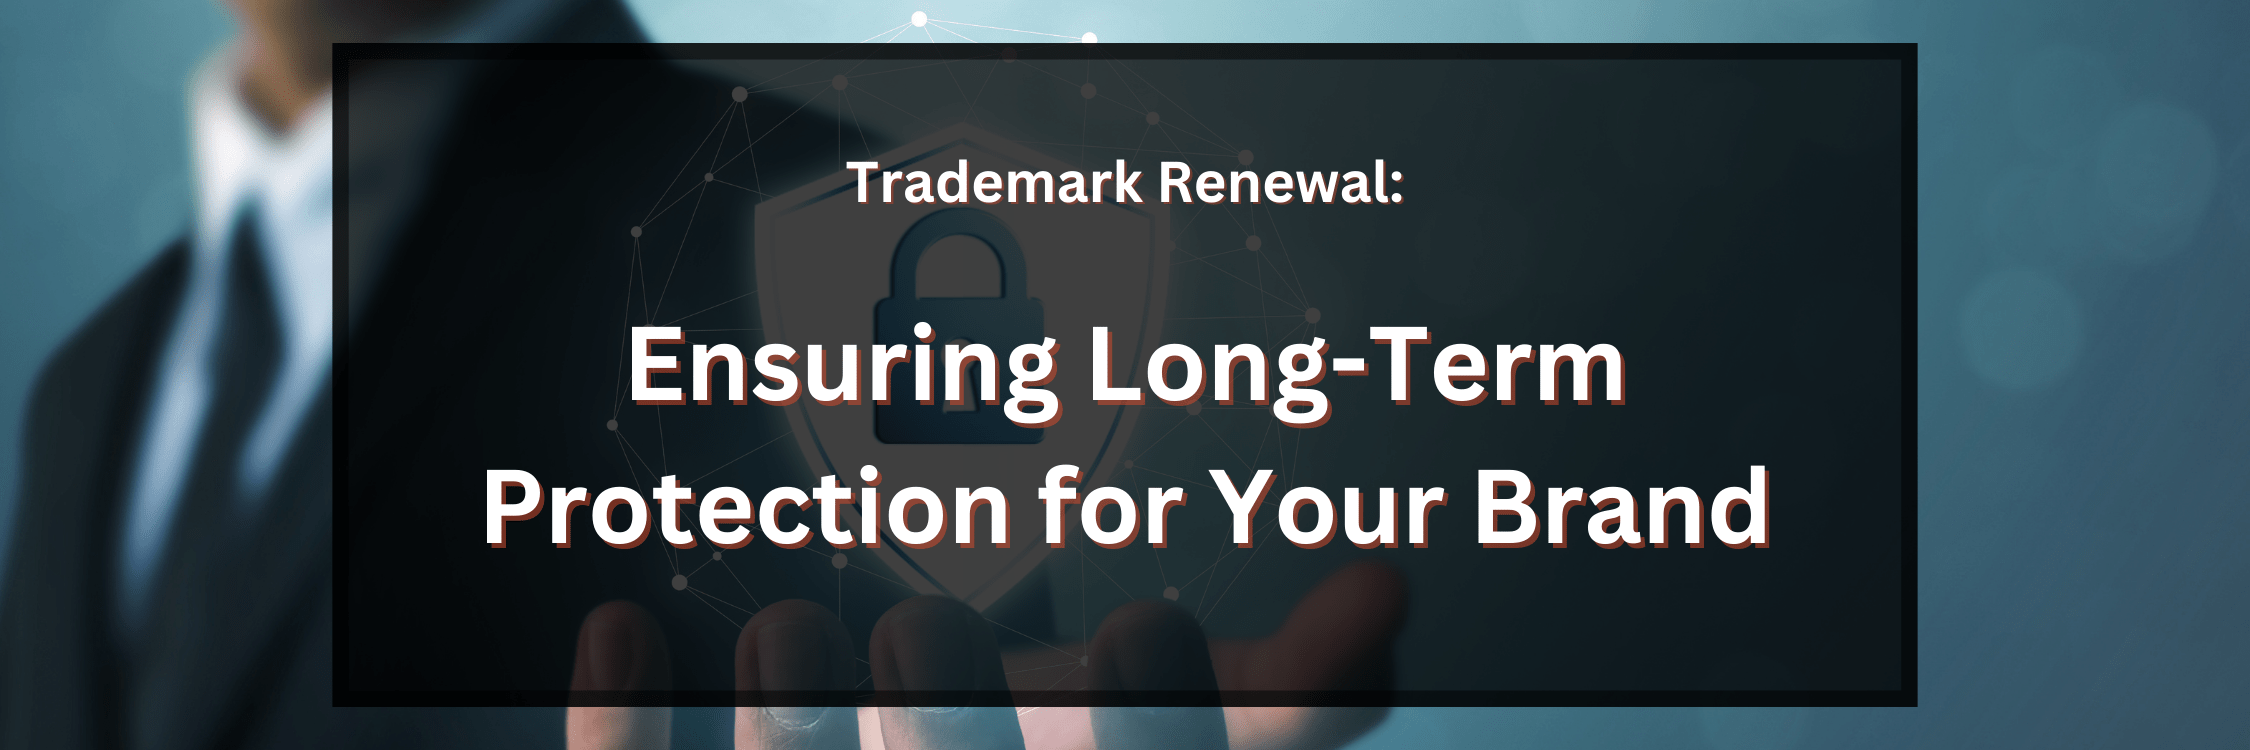 Trademark Renewal Ensuring Long Term Protection For Your Brand